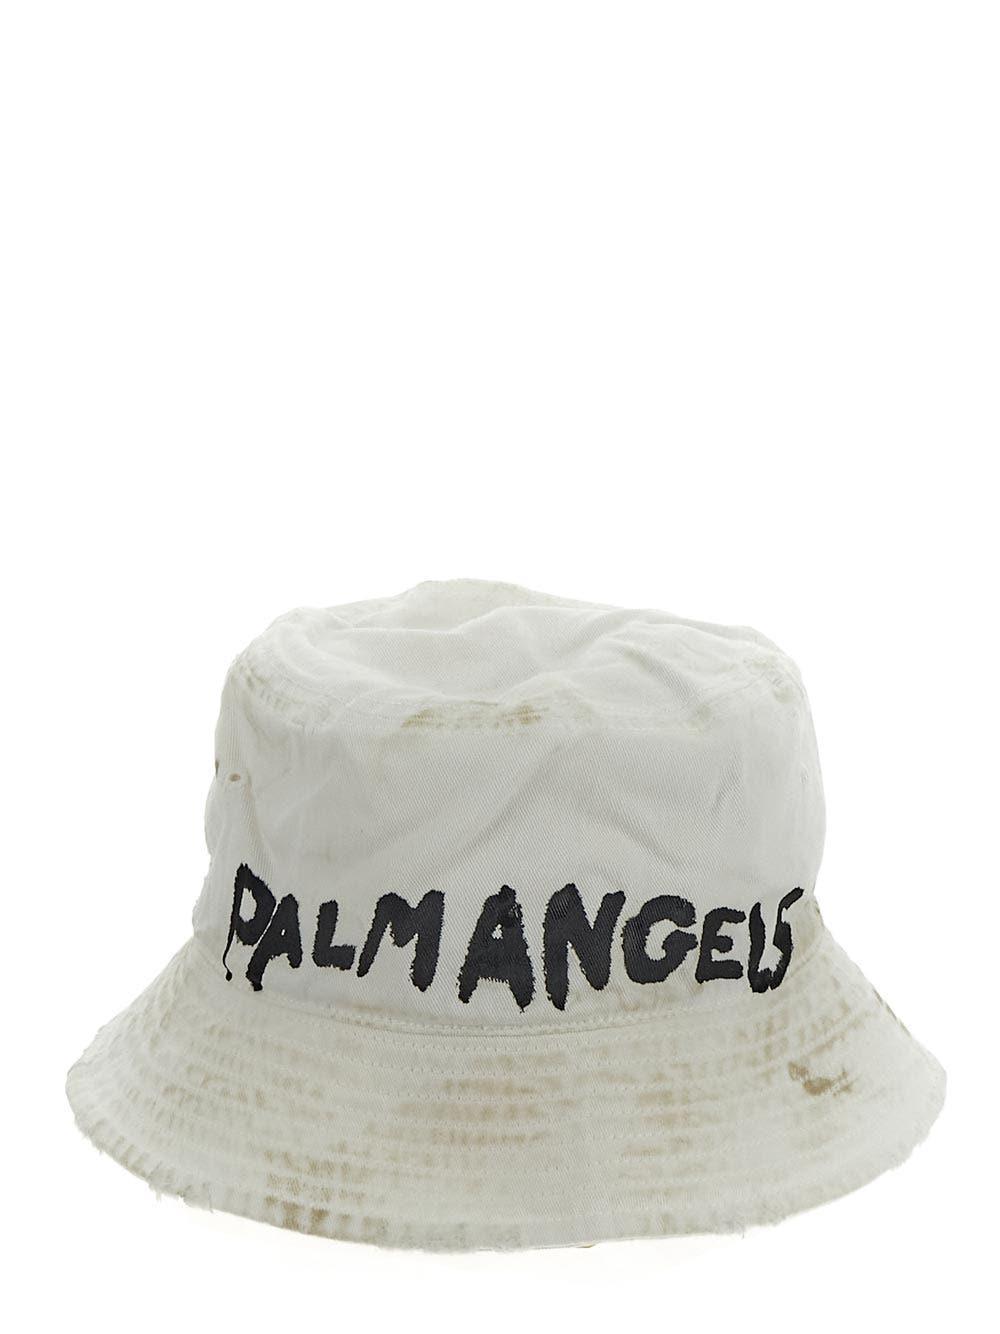 Palm Angels Dirty Effect Bucket Hat